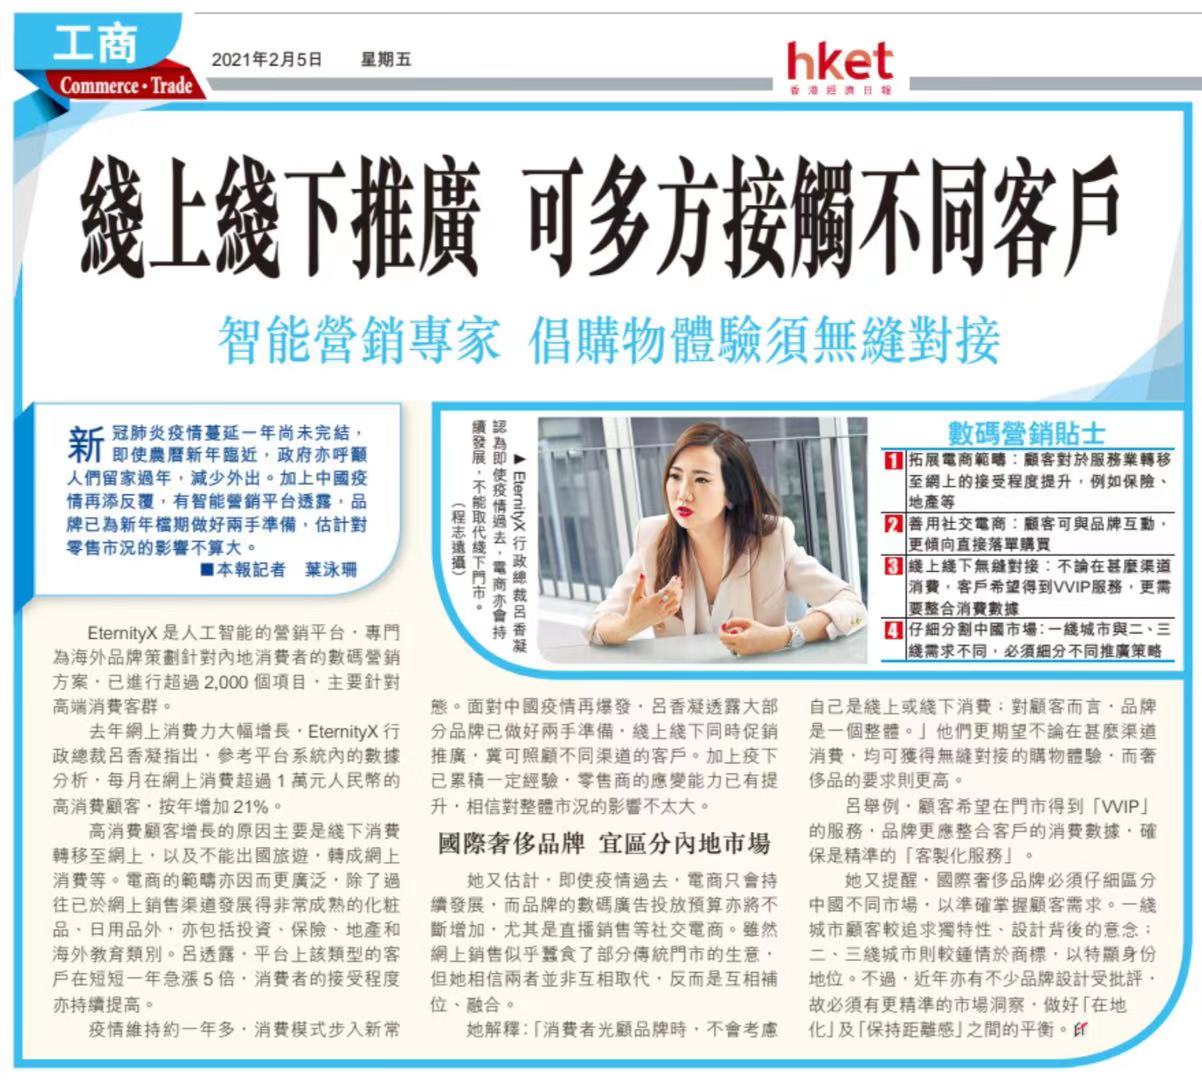 HKET Article on Marketing in China